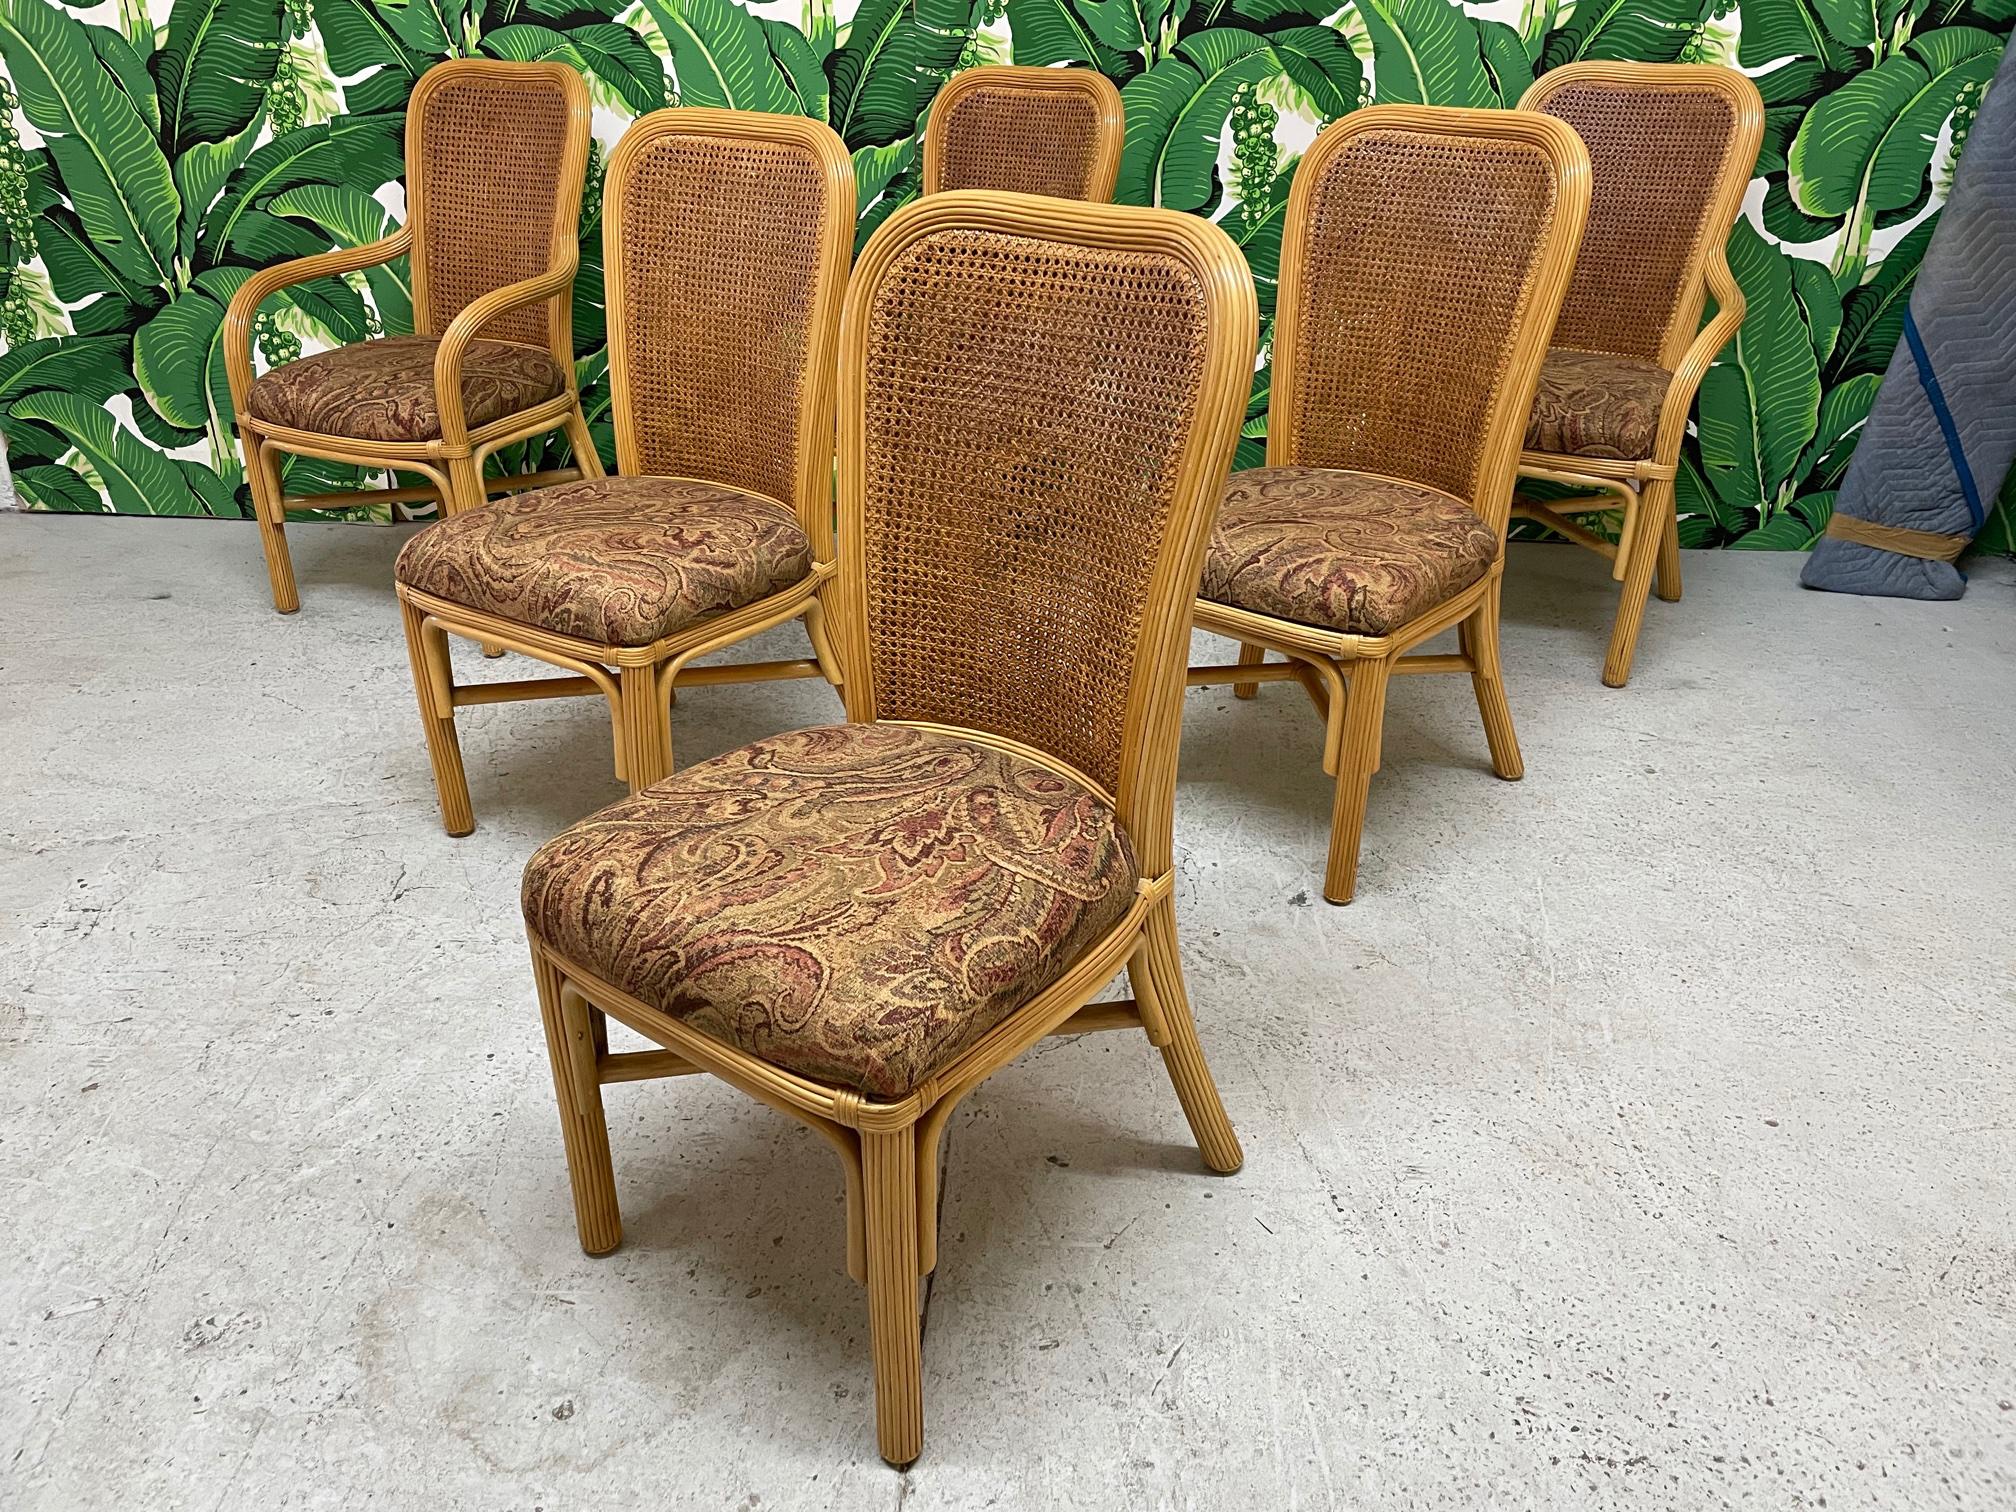 Set of six rattan dining chairs feature full veneer of pencil reed and double caned backs. Very good condition with minor imperfections consistent with age.

Background courtesy of Dorothy Draper 